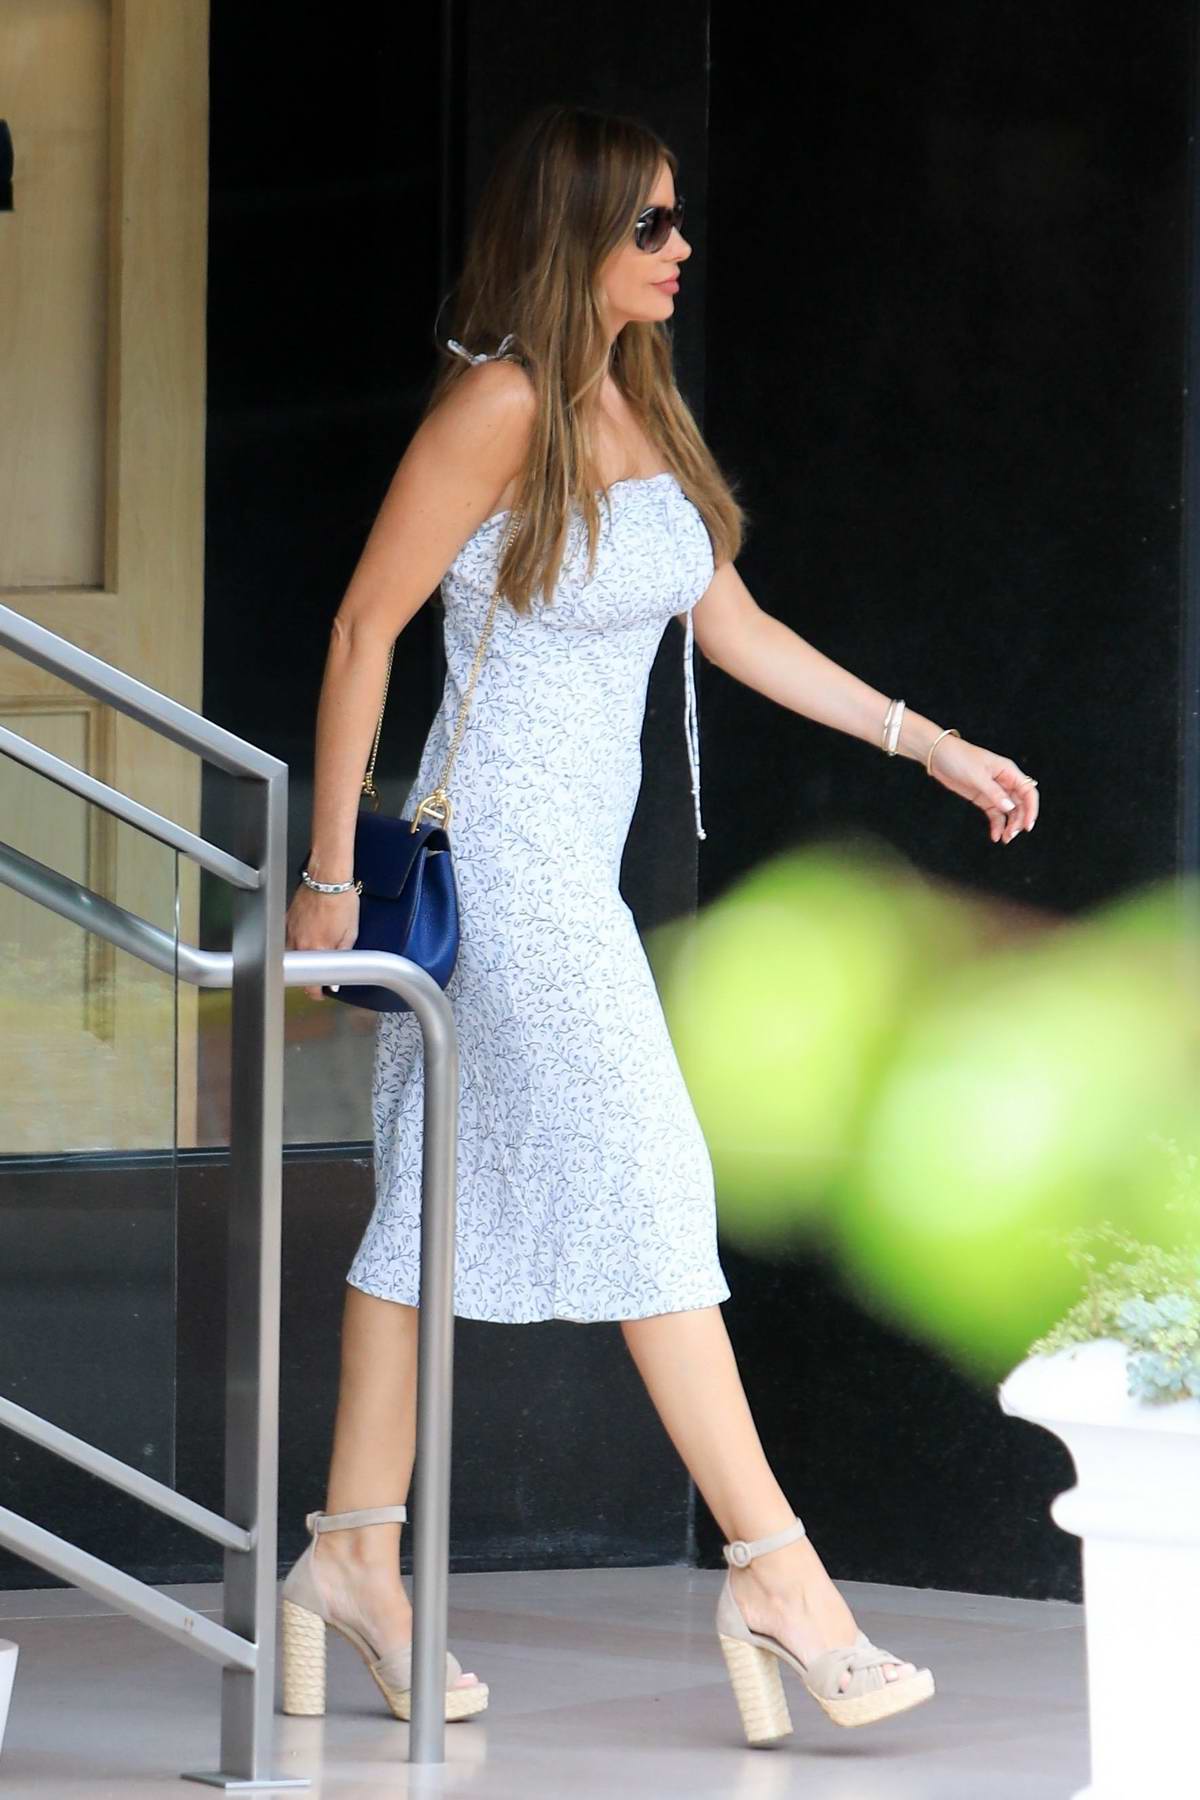 sofia vergara stops by kreation in beverly hills, los angeles-290619_3